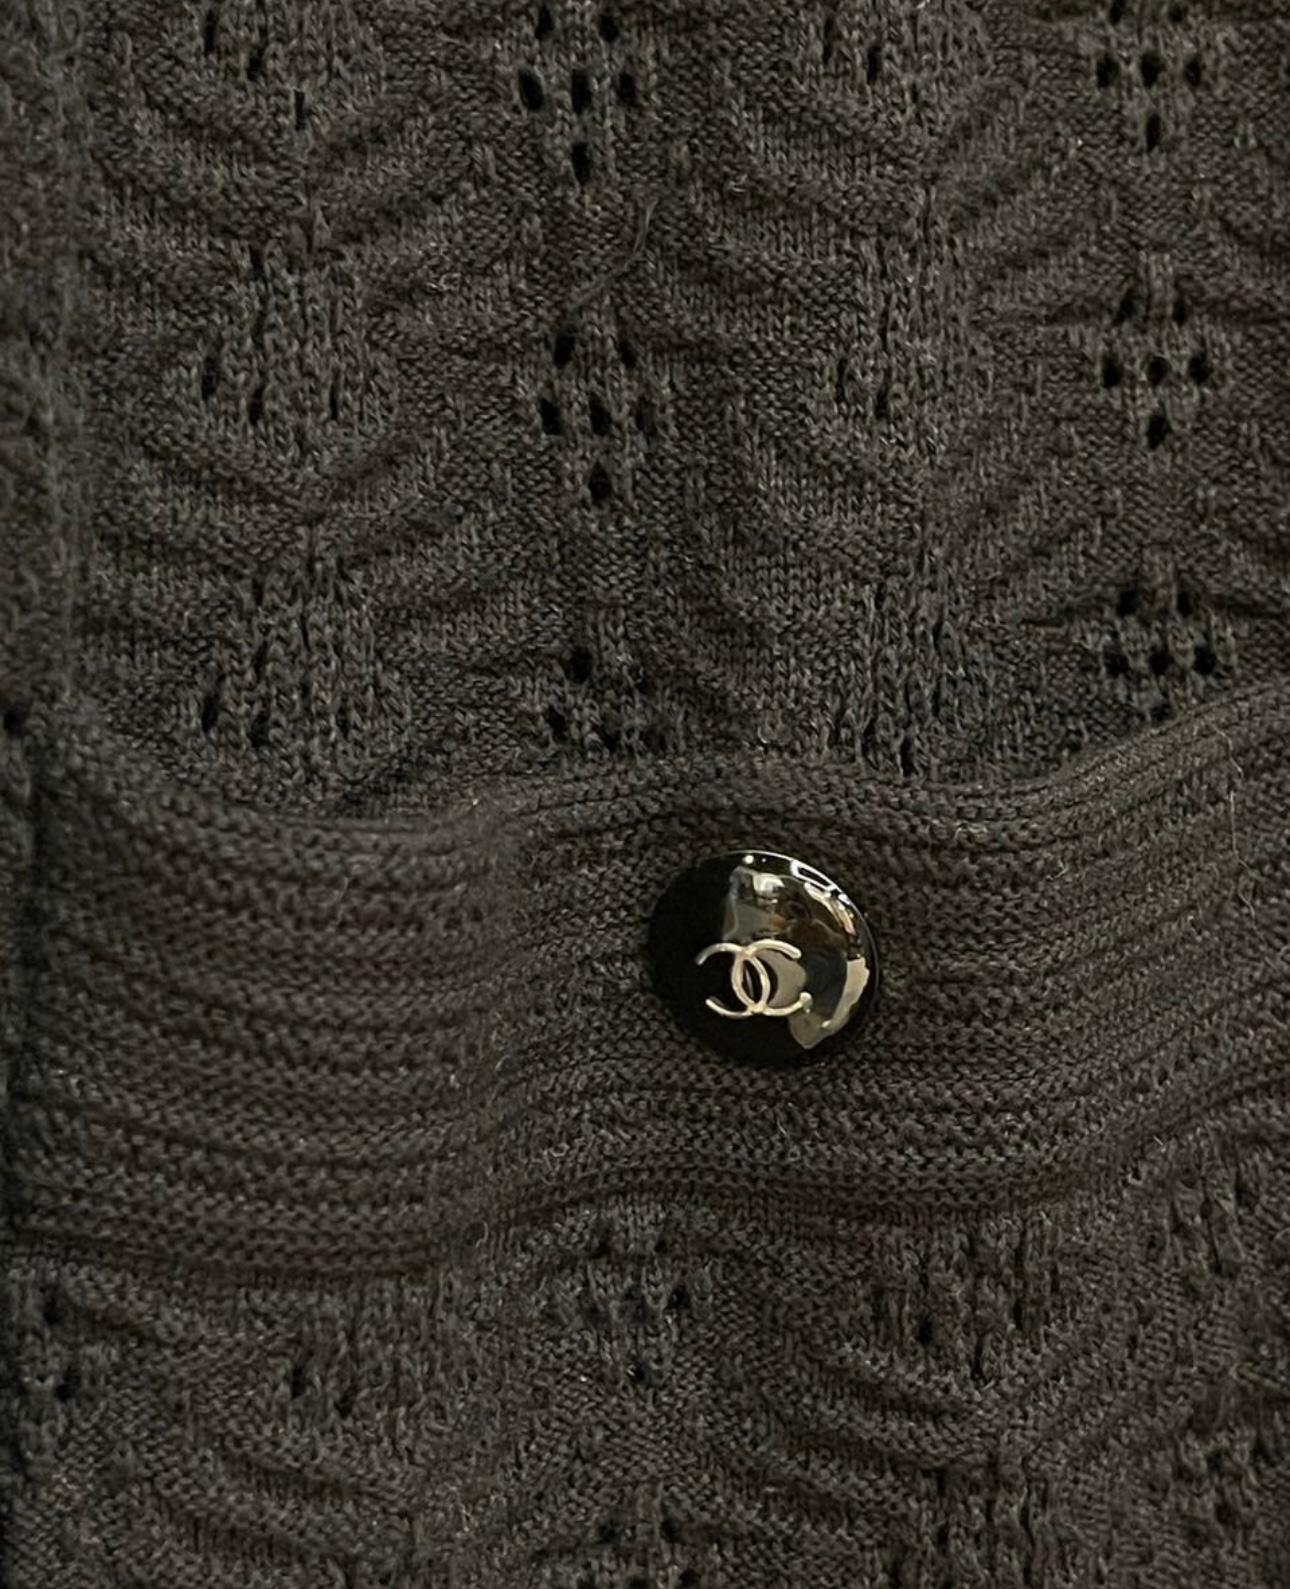 Chanel black summer dress with CC logo buttons at pockets : from Paris / SINGAPORE Cruise Collection.
Size mark 42 FR. Pristine condition.